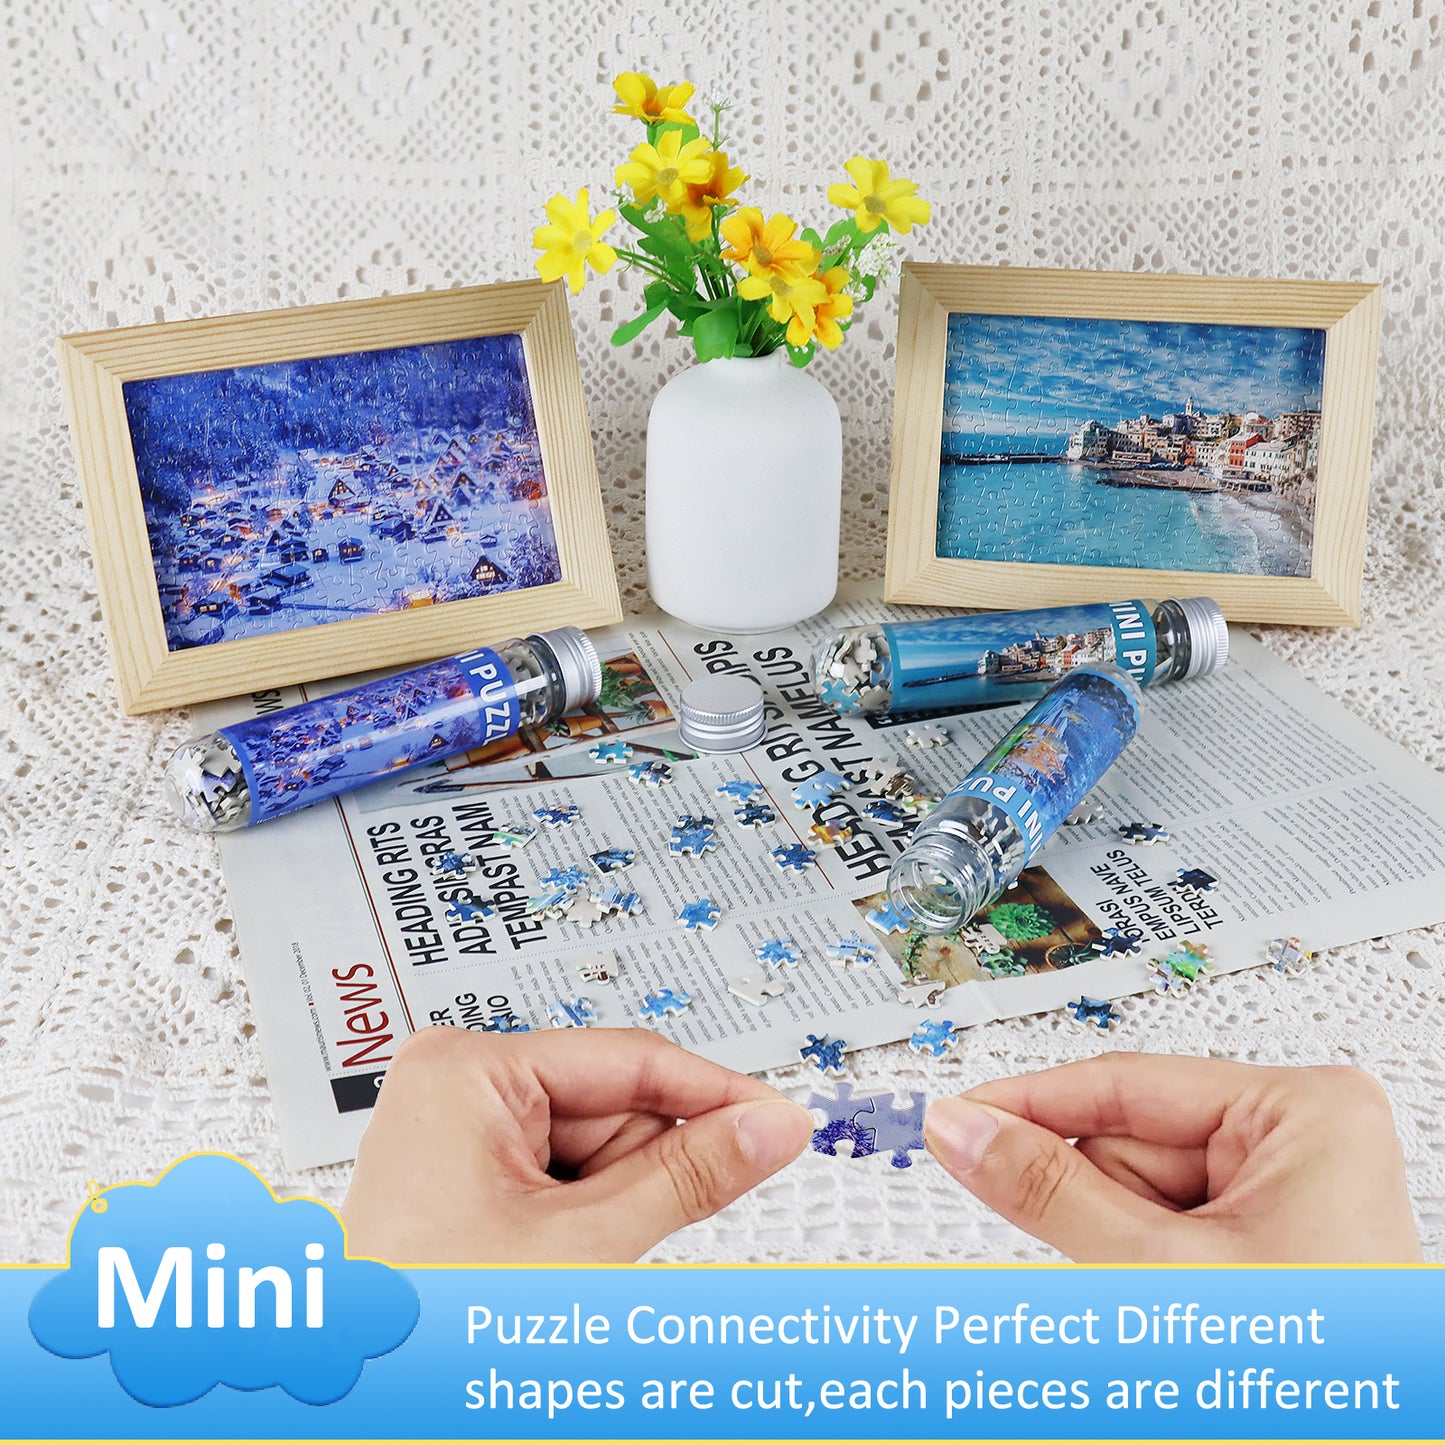 MISITU Mini Puzzle - Snow and Beach - 3 Pack of 150 Pieces Puzzles for Adult 6 x 4 Inches